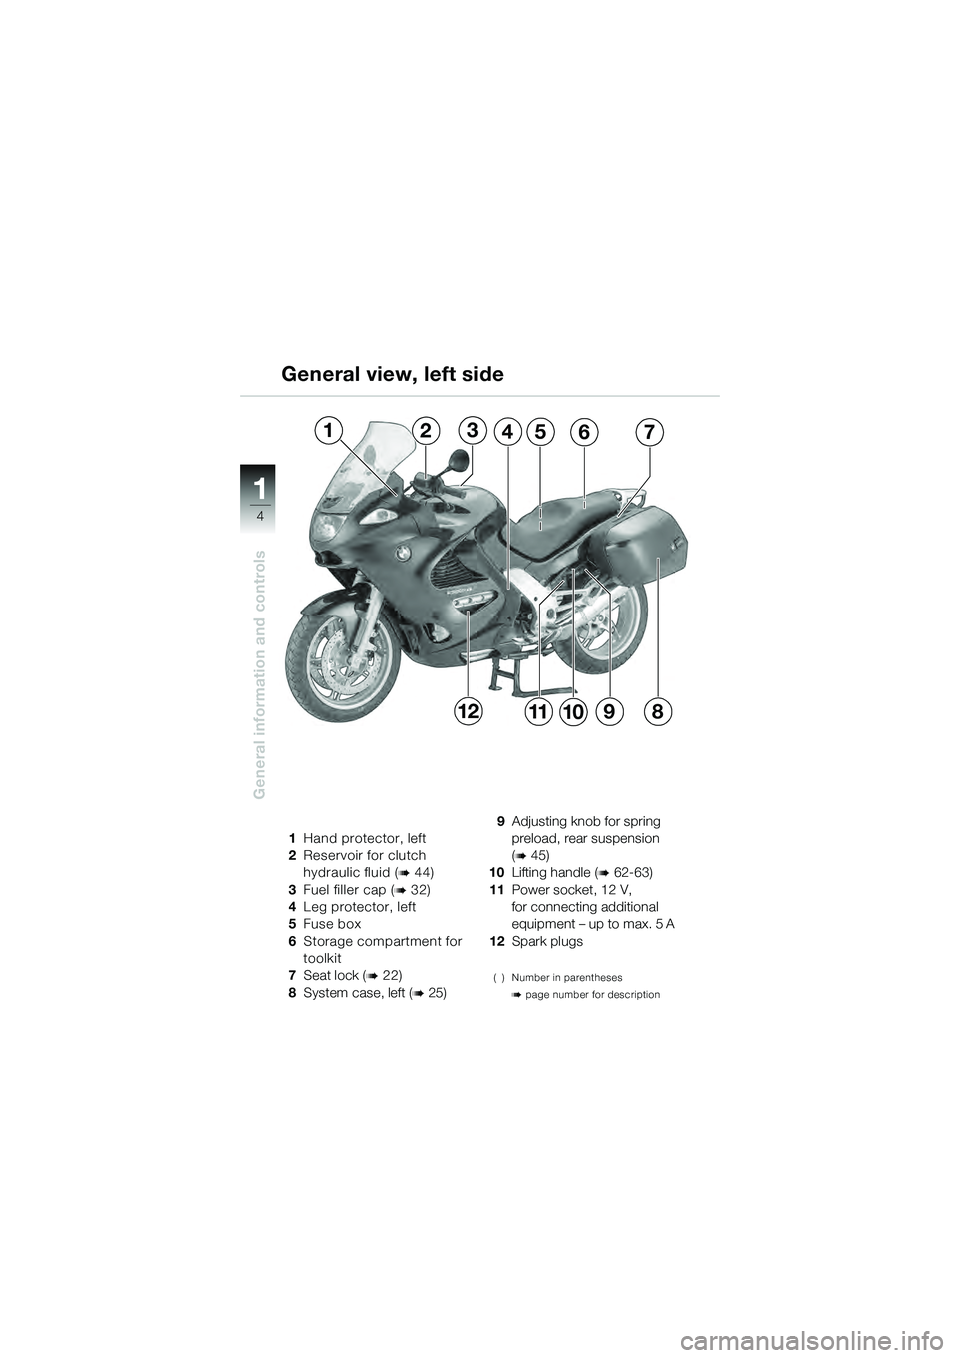 BMW MOTORRAD K 1200 GT 2004  Riders Manual (in English) 4
General information and controls
1
General view, left side
1Hand protector, left
2 Reservoir for clutch 
hydraulic fluid (
 44)
3 Fuel filler cap (
 32)
4 Leg protector, left
5 Fuse box
6 Storage 